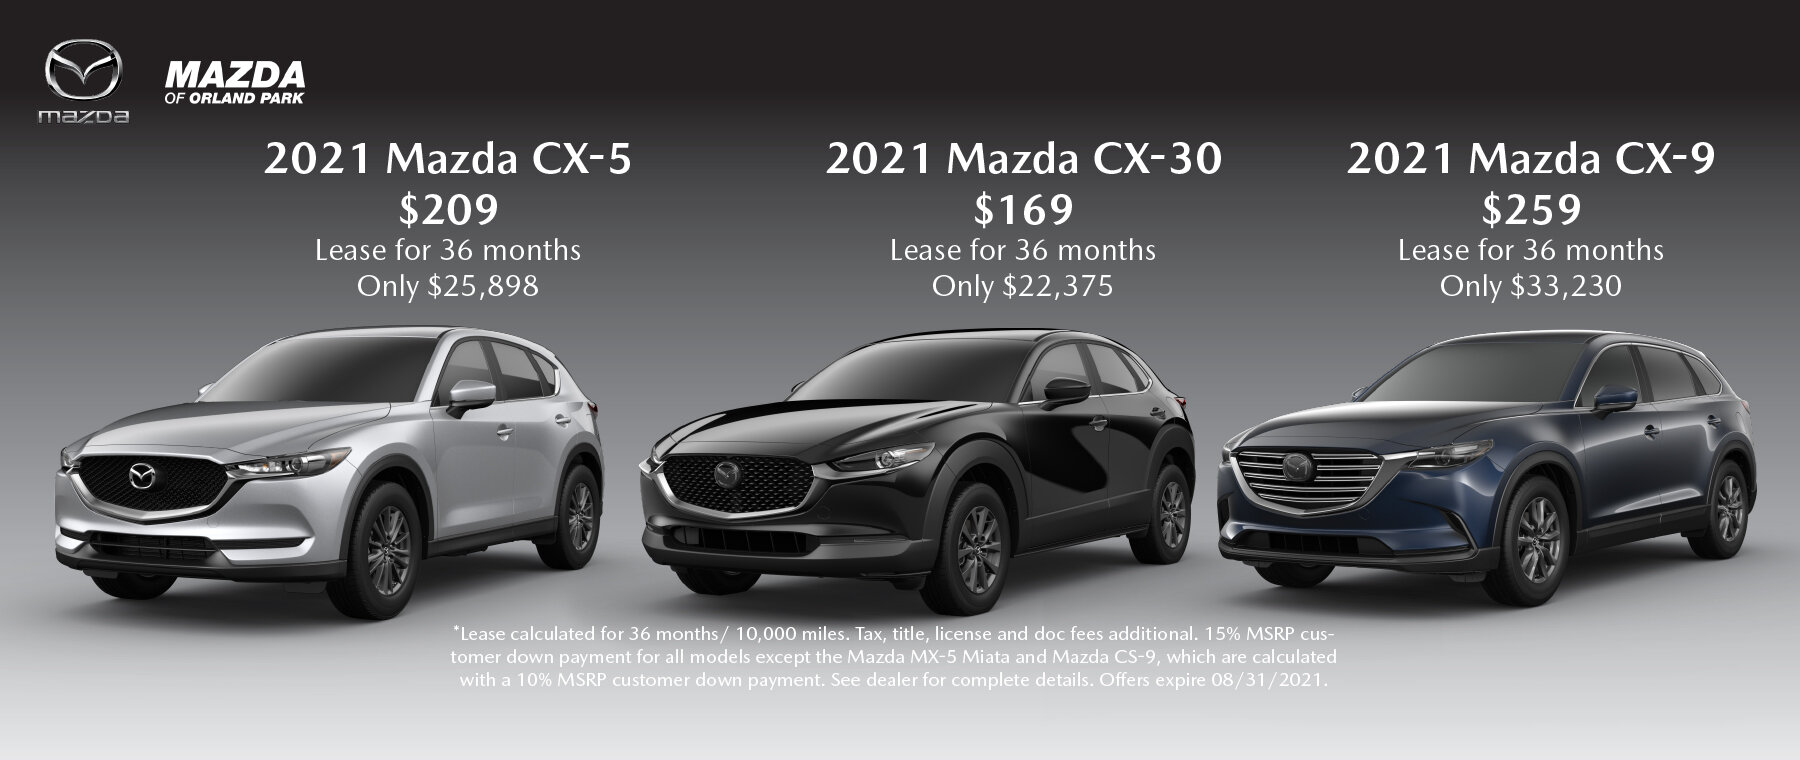 Mazda Offers